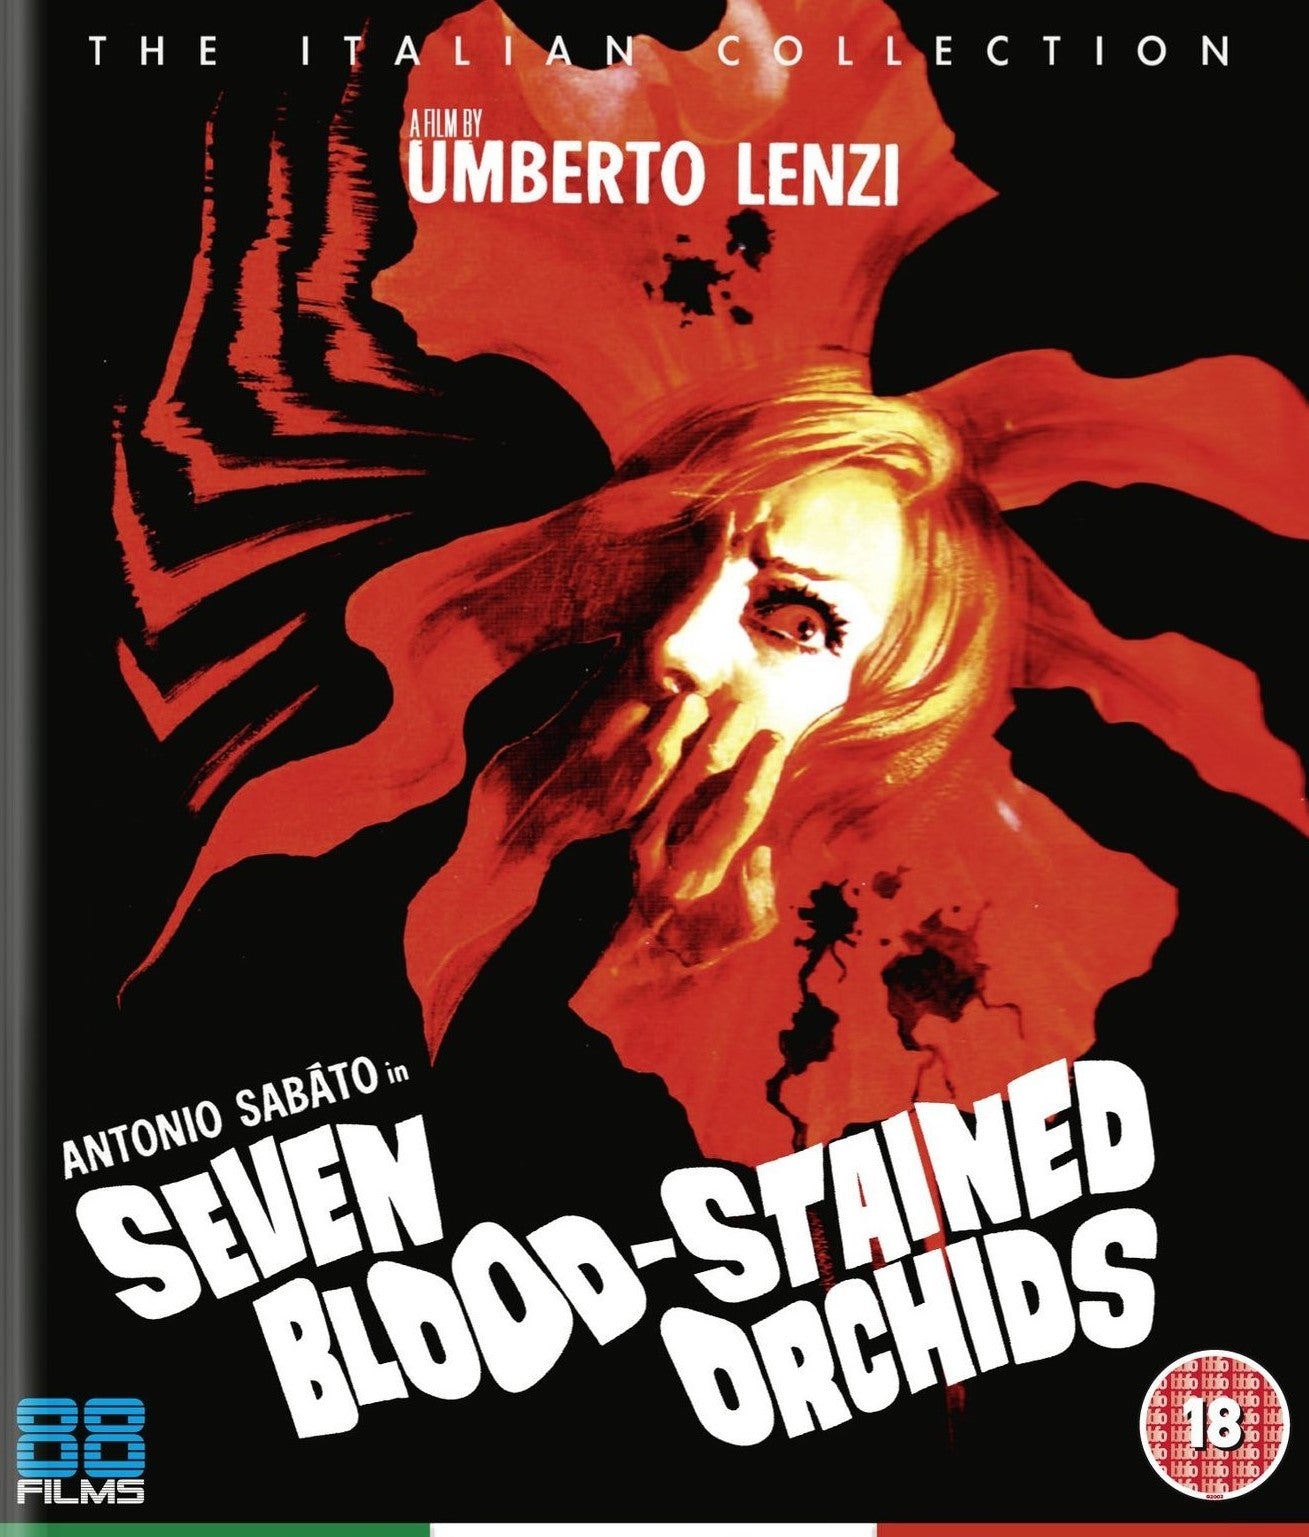 SEVEN BLOOD-STAINED ORCHIDS (REGION FREE IMPORT) BLU-RAY